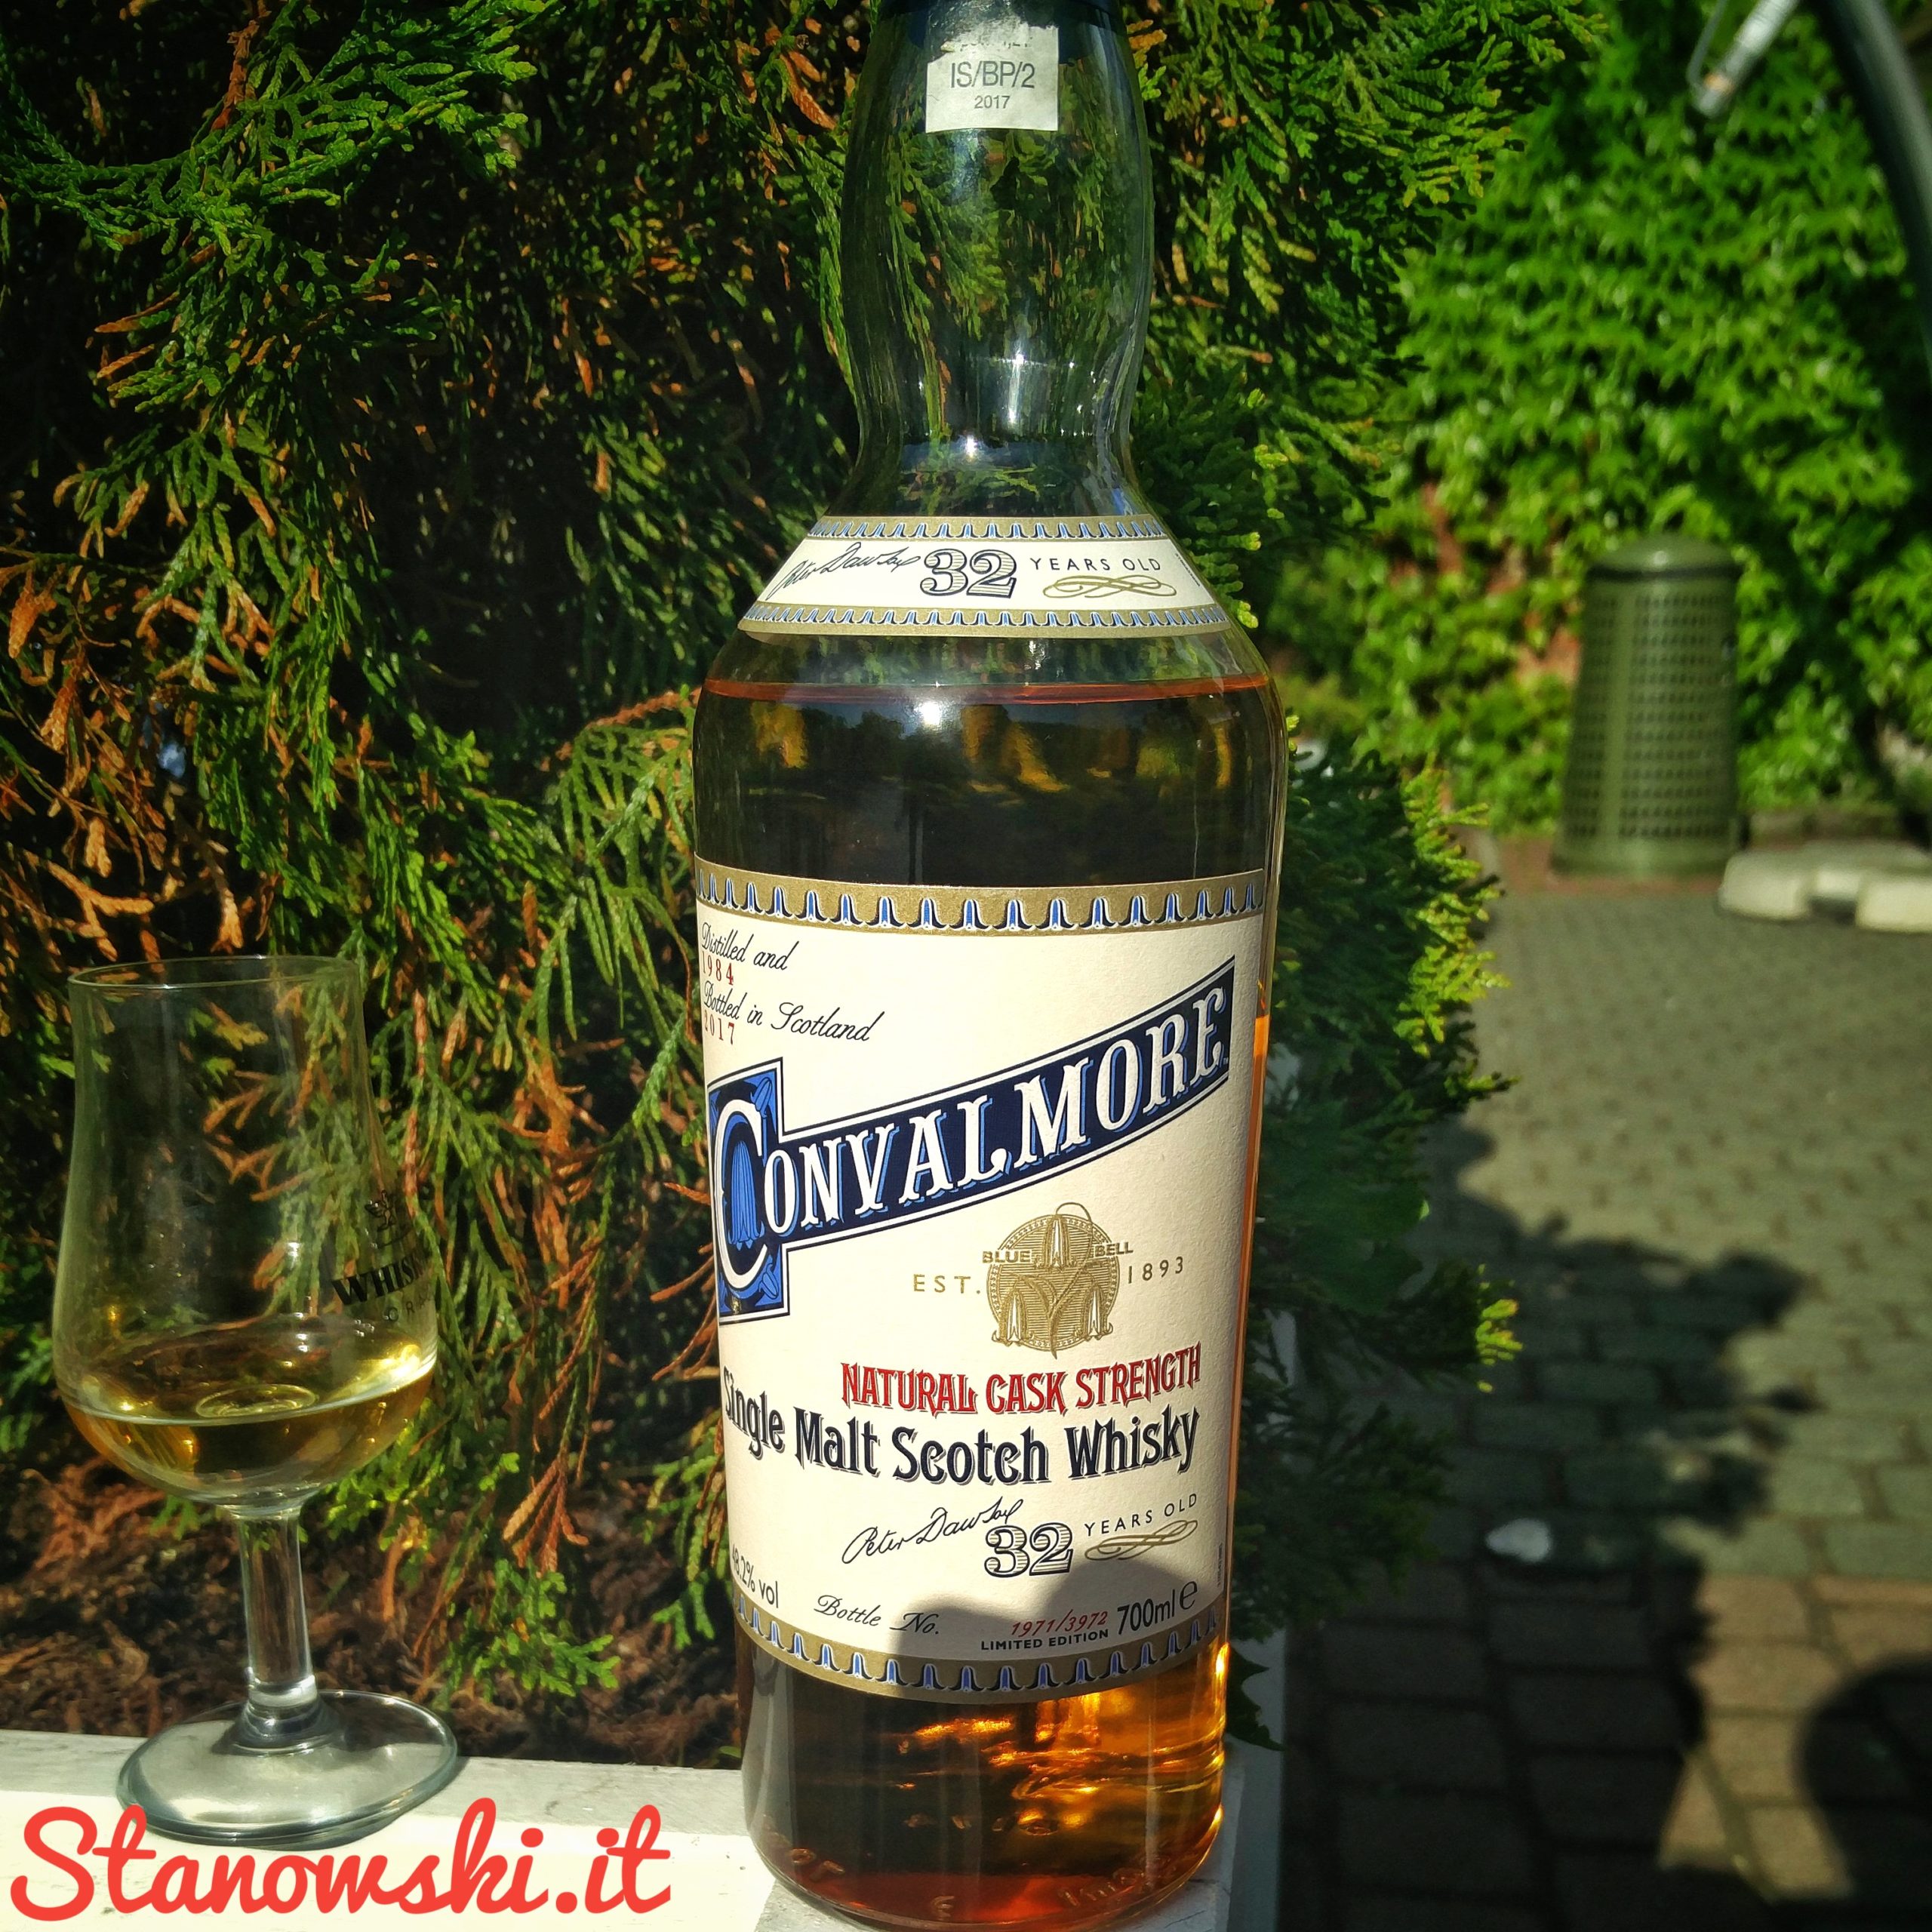 Convalmore 32 Year Old 1984